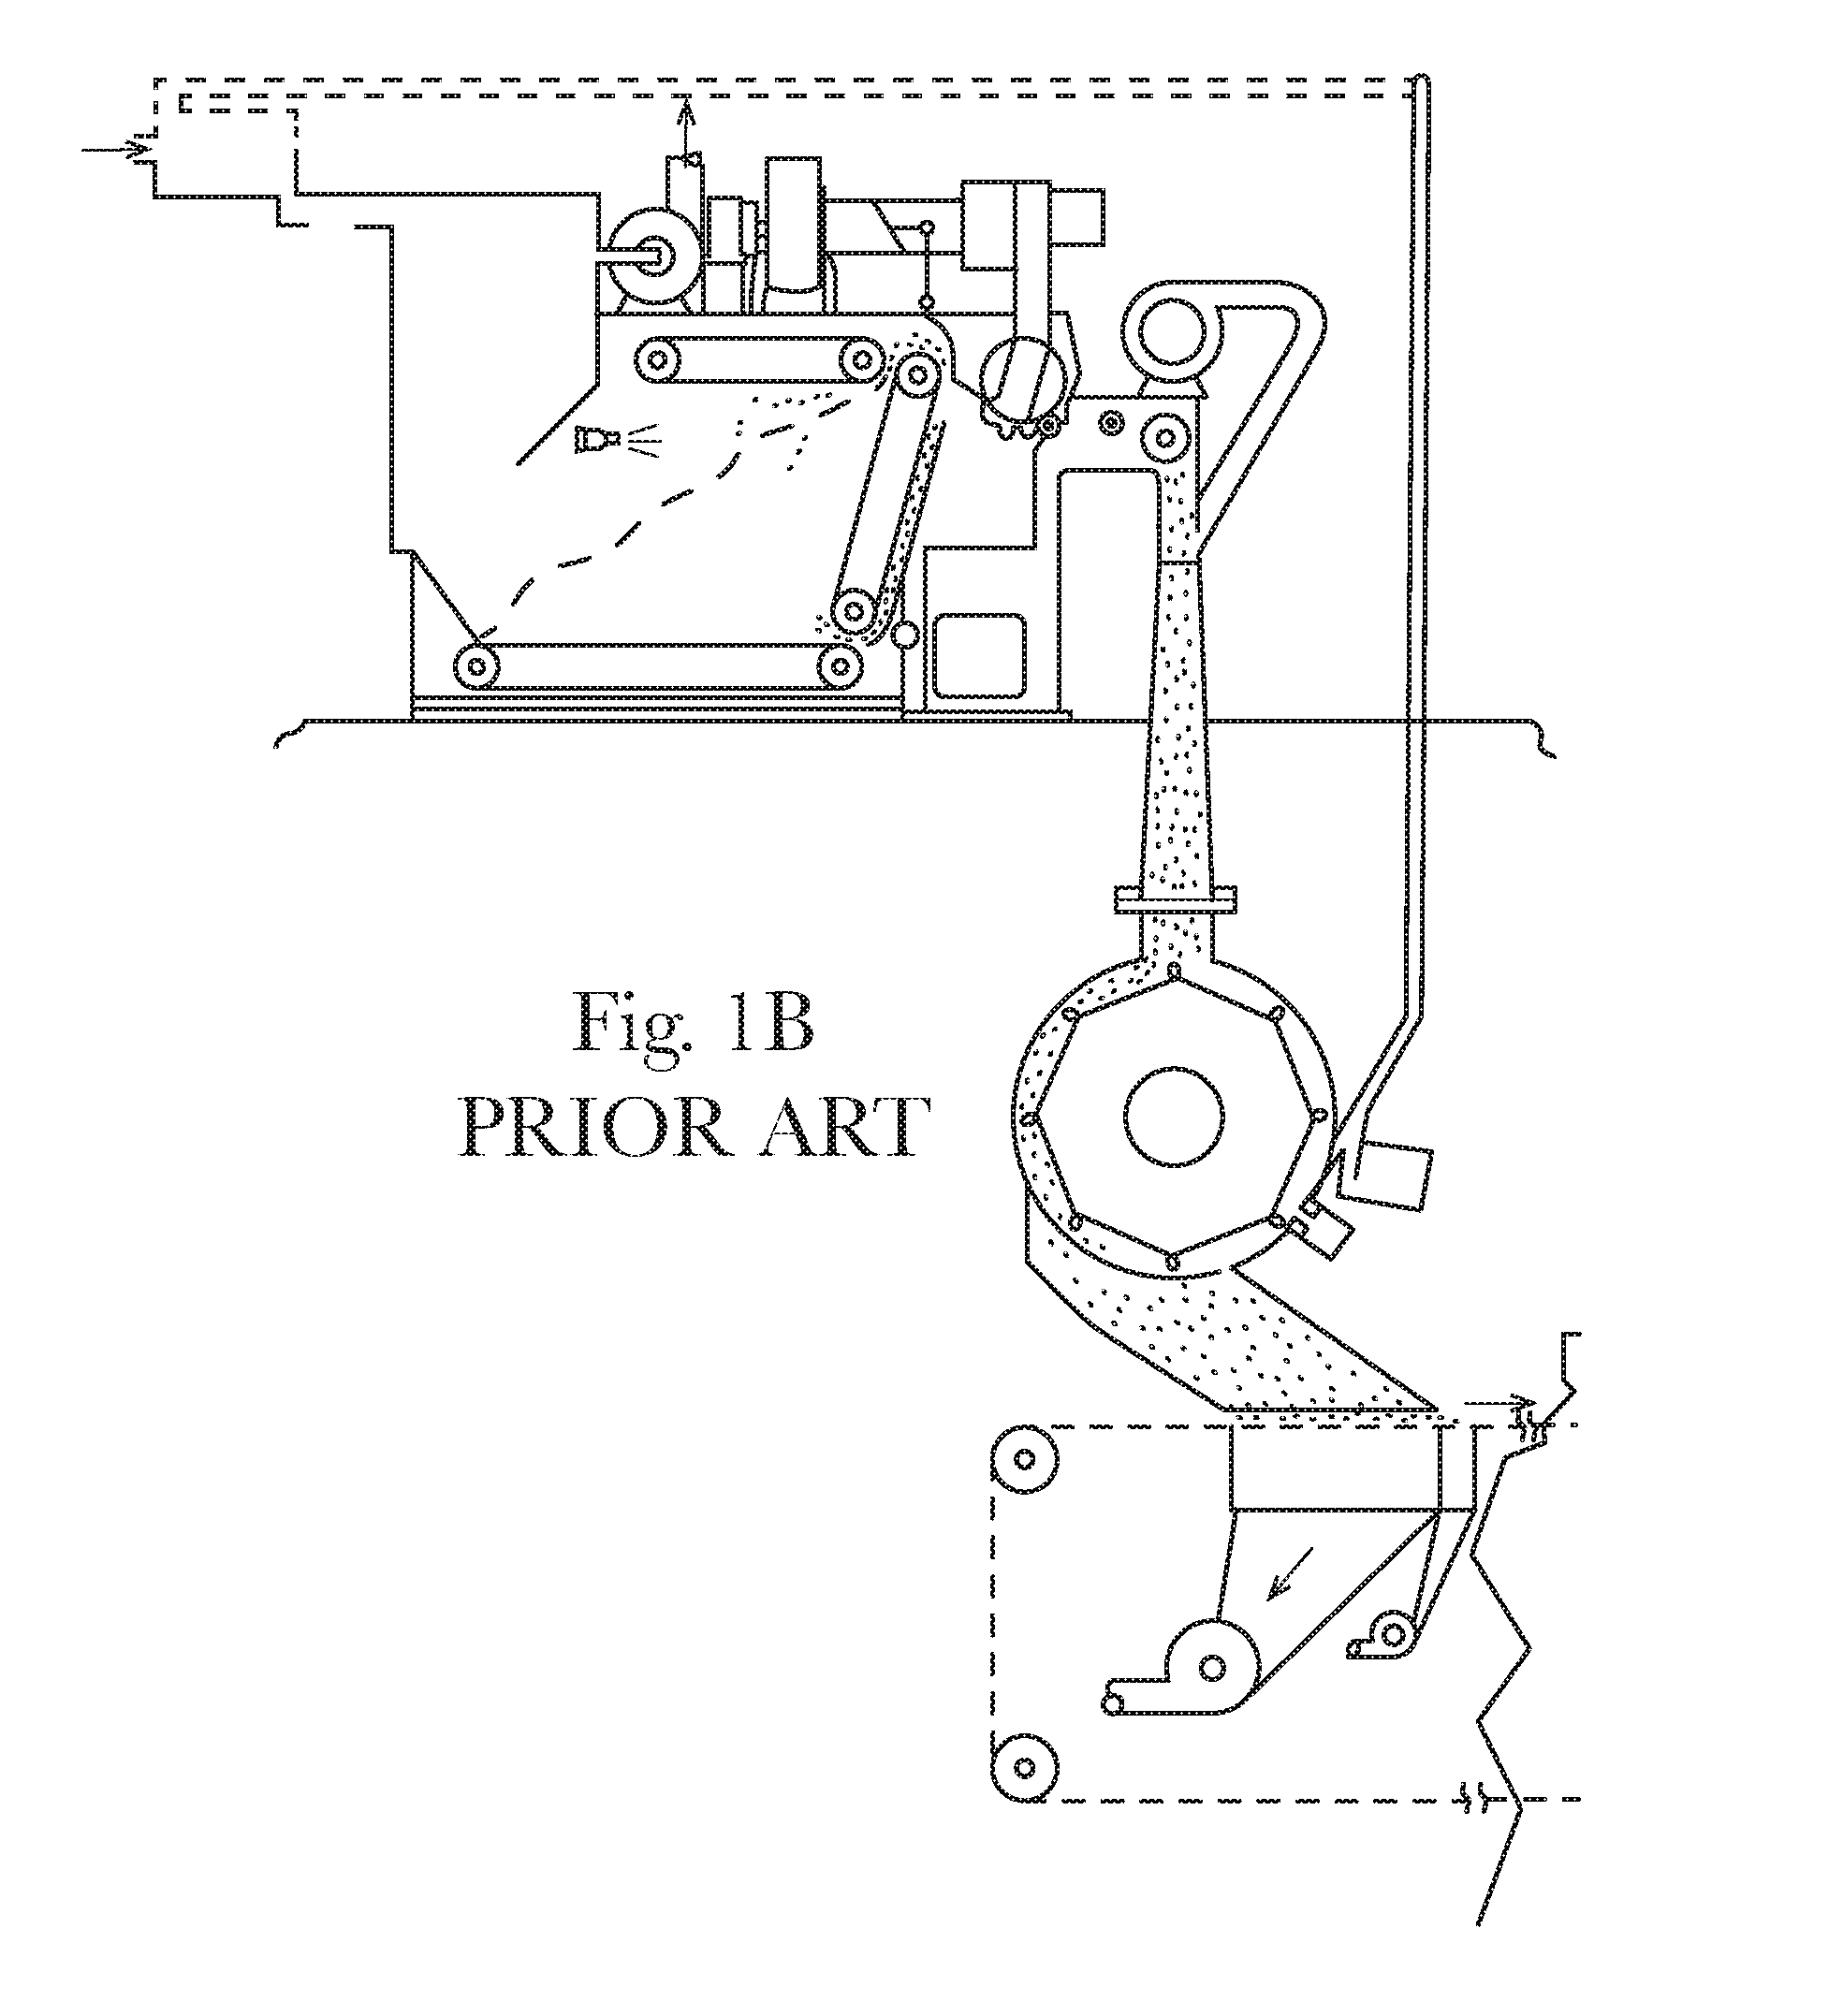 Article of Manufacture Making System